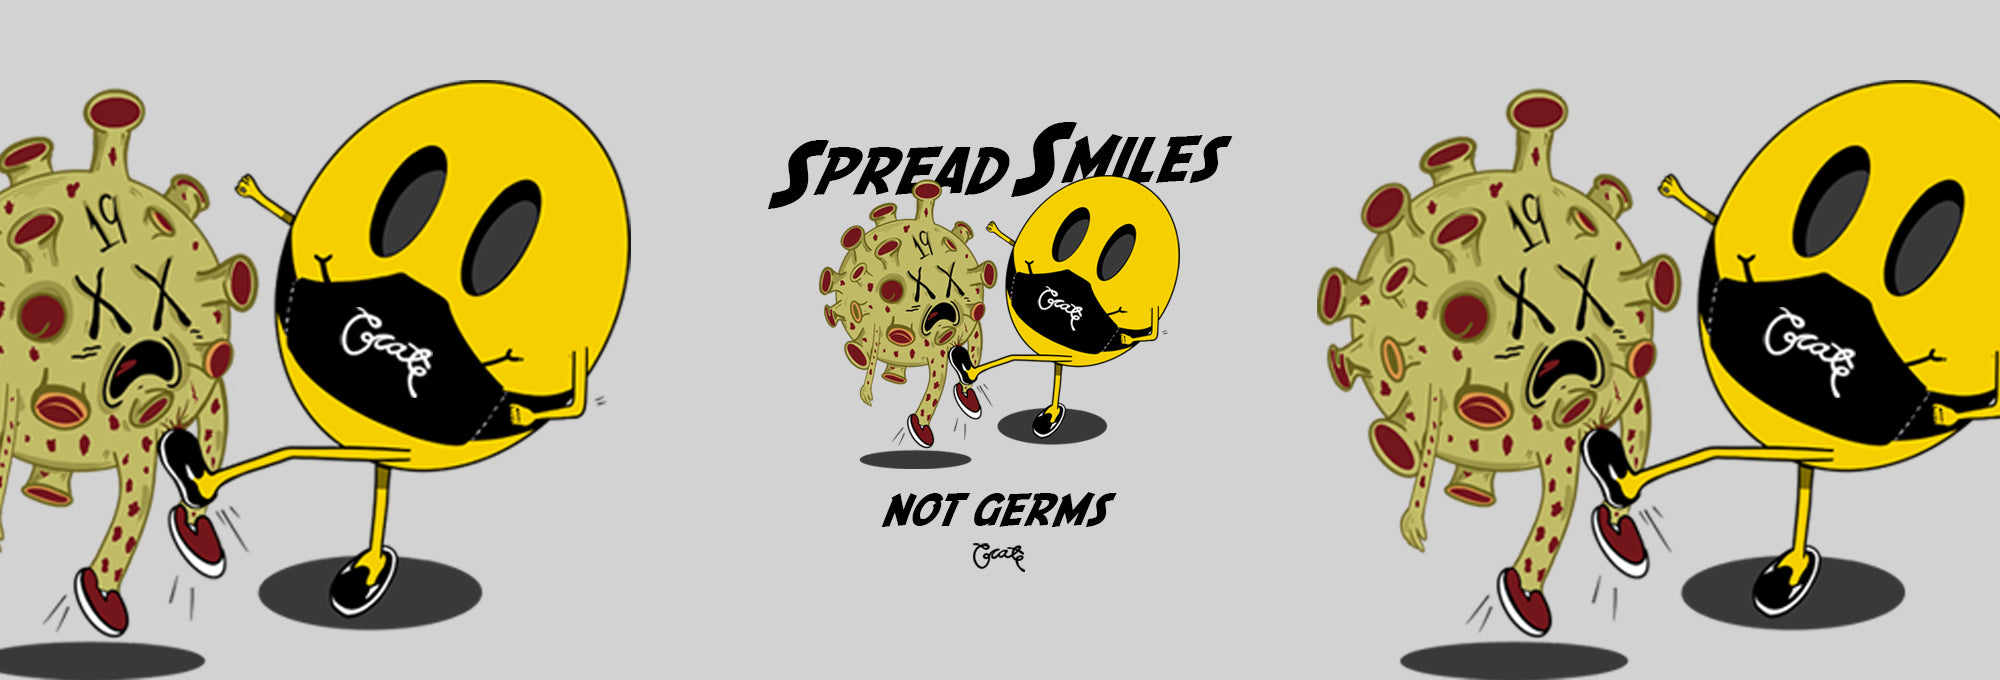 SPREAD SMILES NOT GERMS 2.0